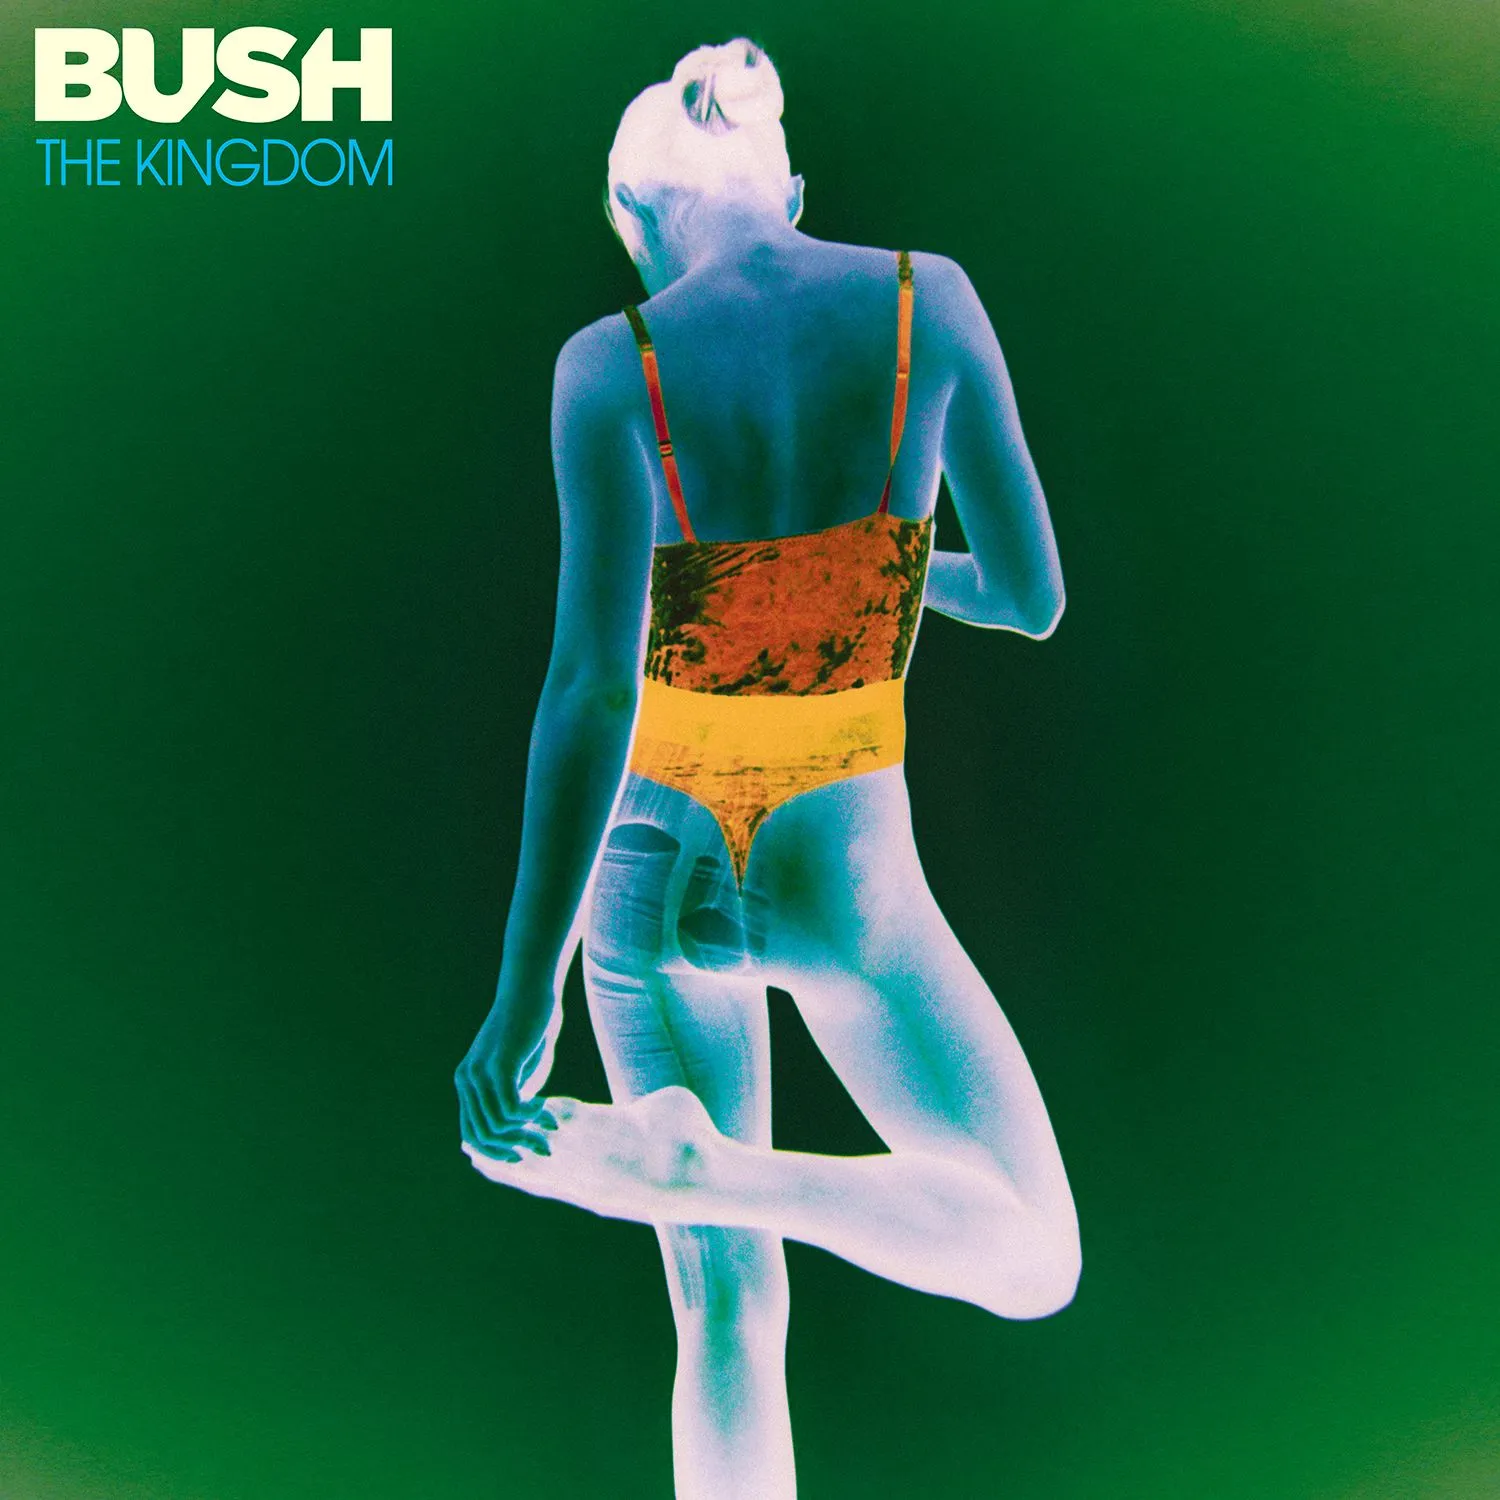 Bush May Have Released Its Best Album With ‘The Kingdom’